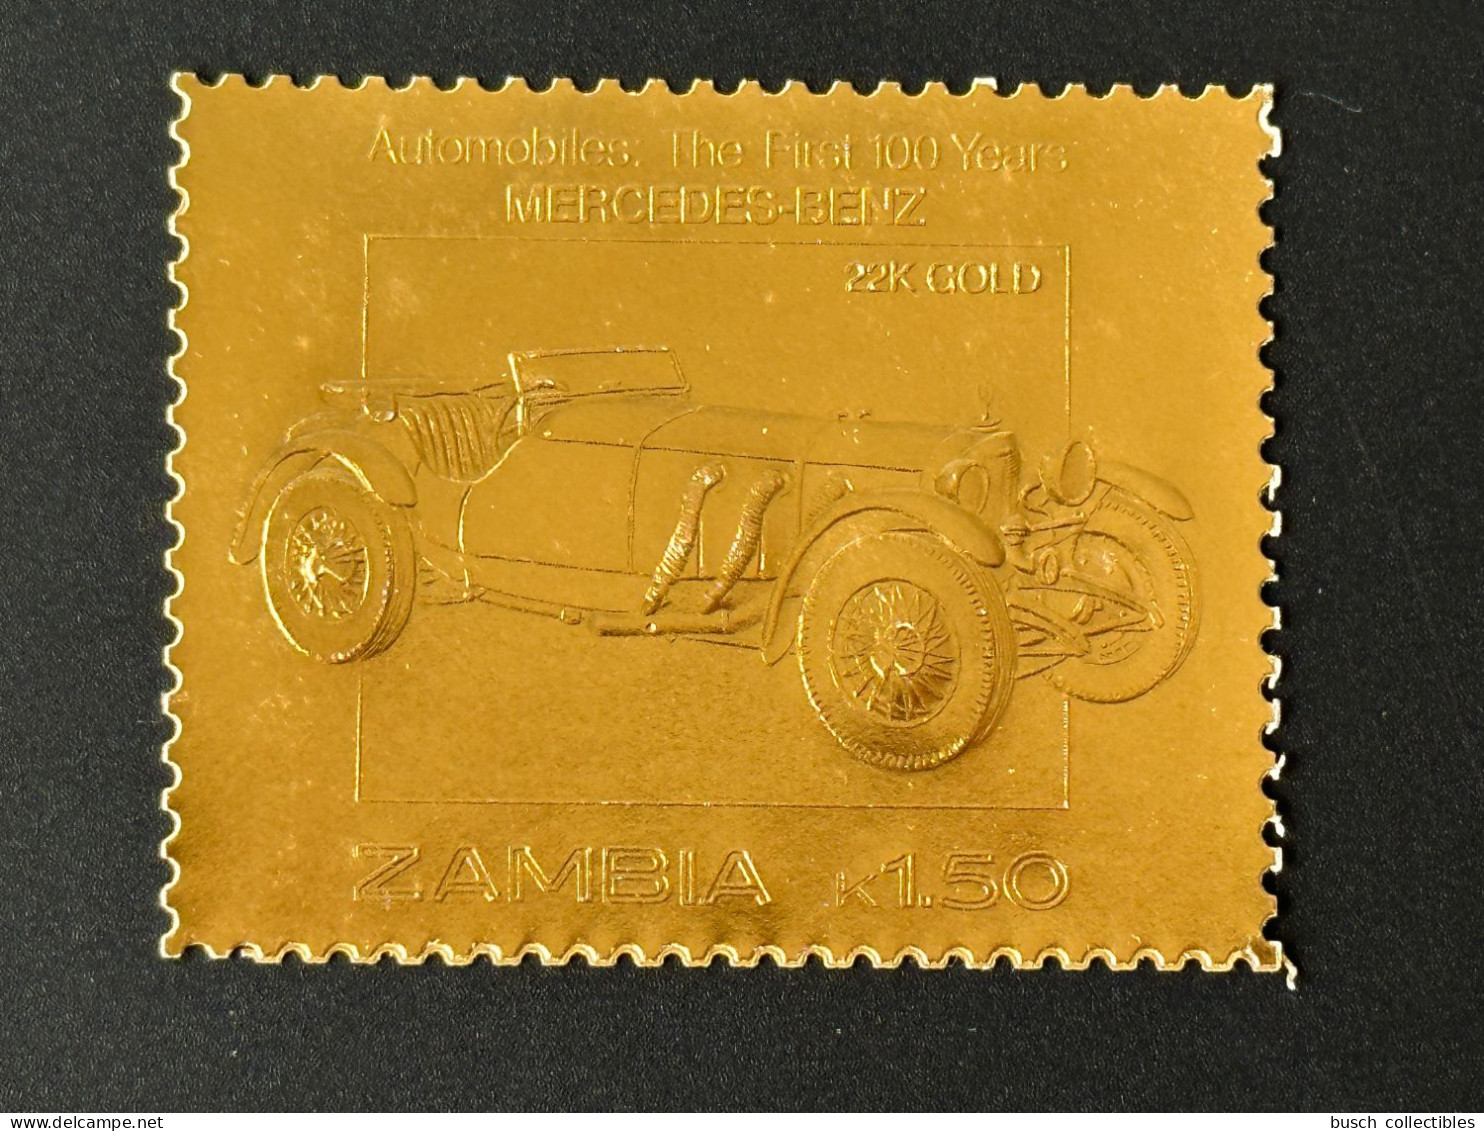 Zambie Zambia Sambia 1987 Mi. A380 Gold Or The First 100 Years Automobile Car Voiture Auto Mercedes Daimler Benz - Zambia (1965-...)